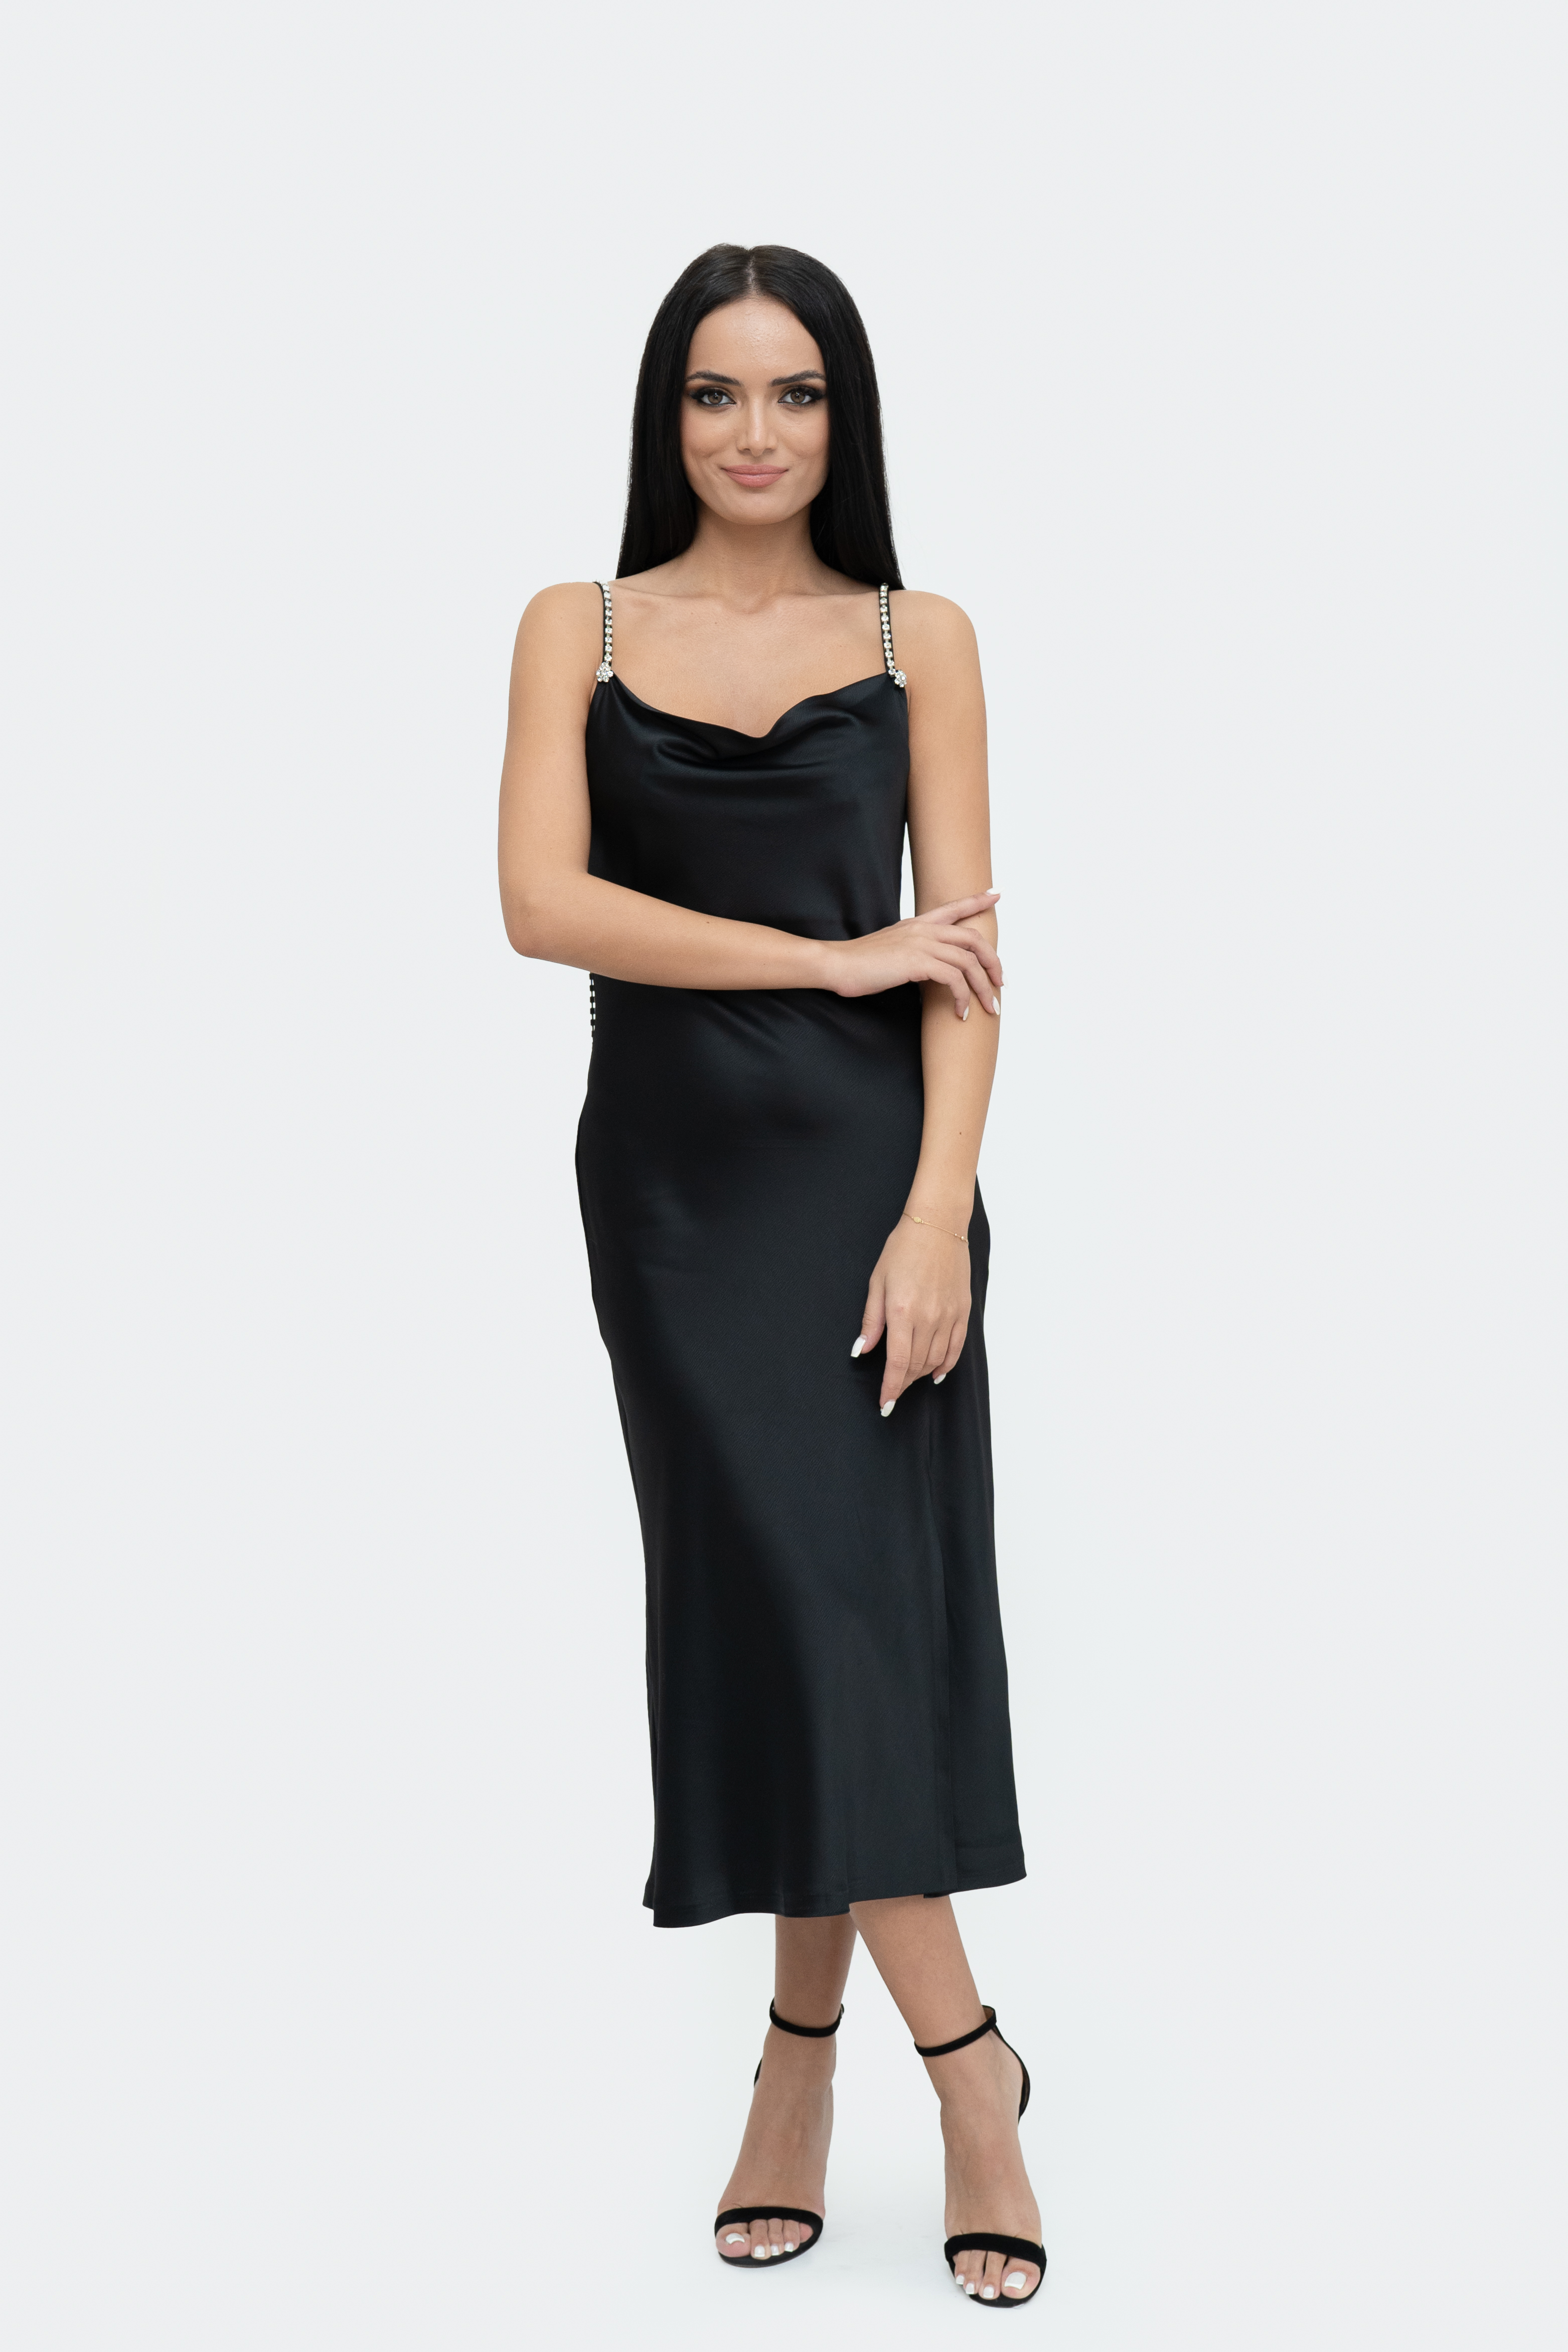 bouquet Absorb exaggerate rochie tip furou neagra